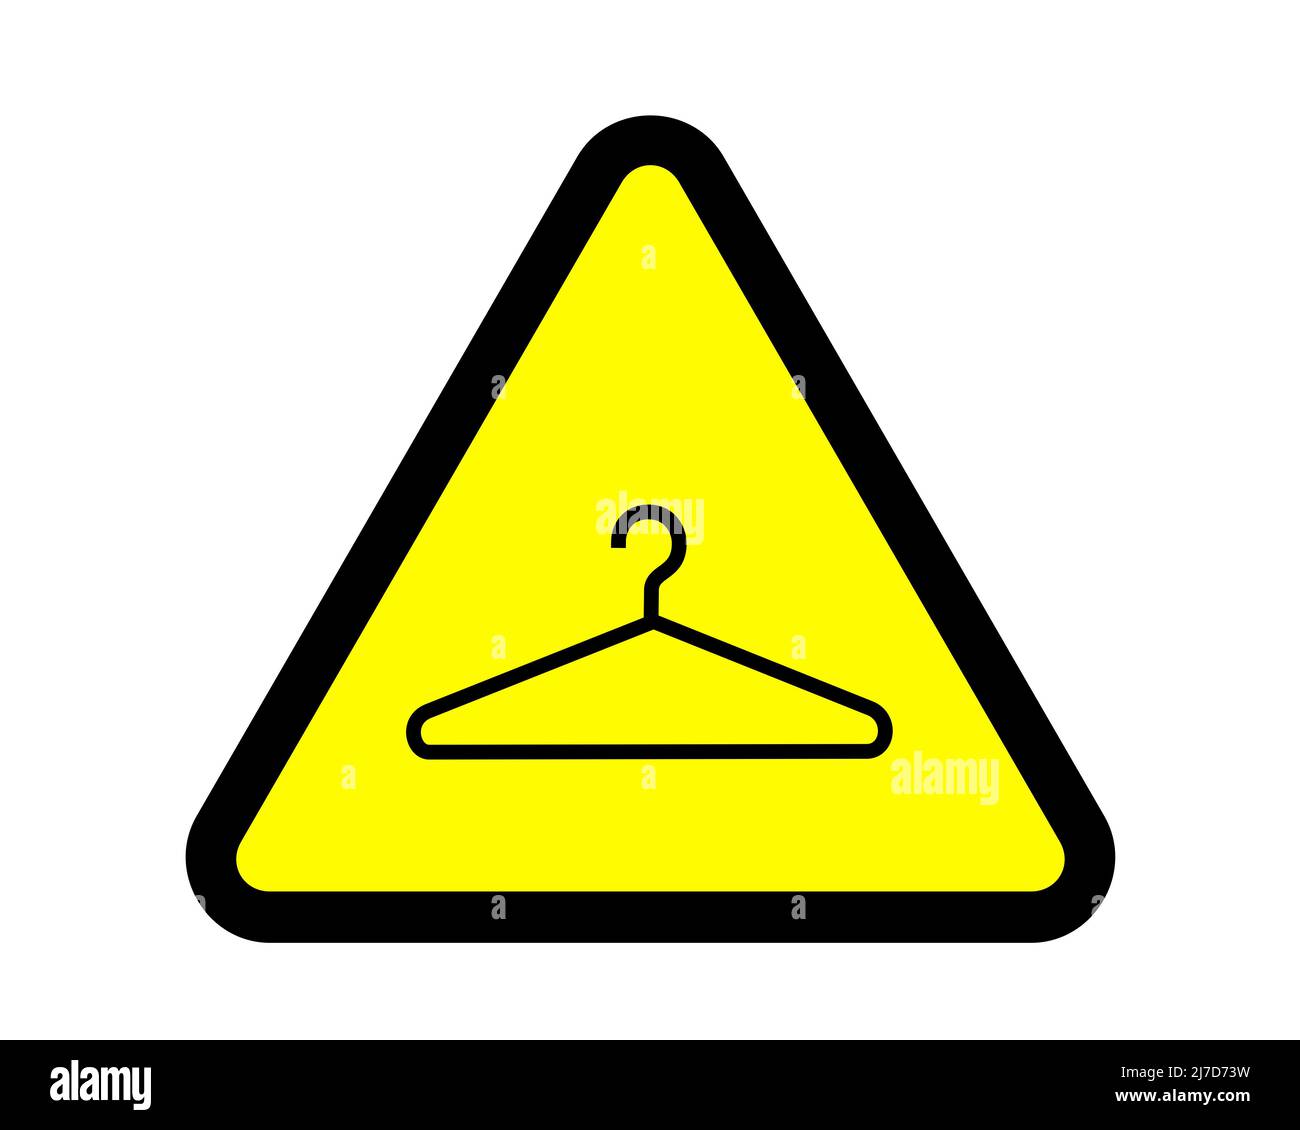 Warning sign with symbol of coat hanger - metaphor of danger and risk of risky and dangerous self induced abortion. Vector illustration isolated on wh Stock Photo